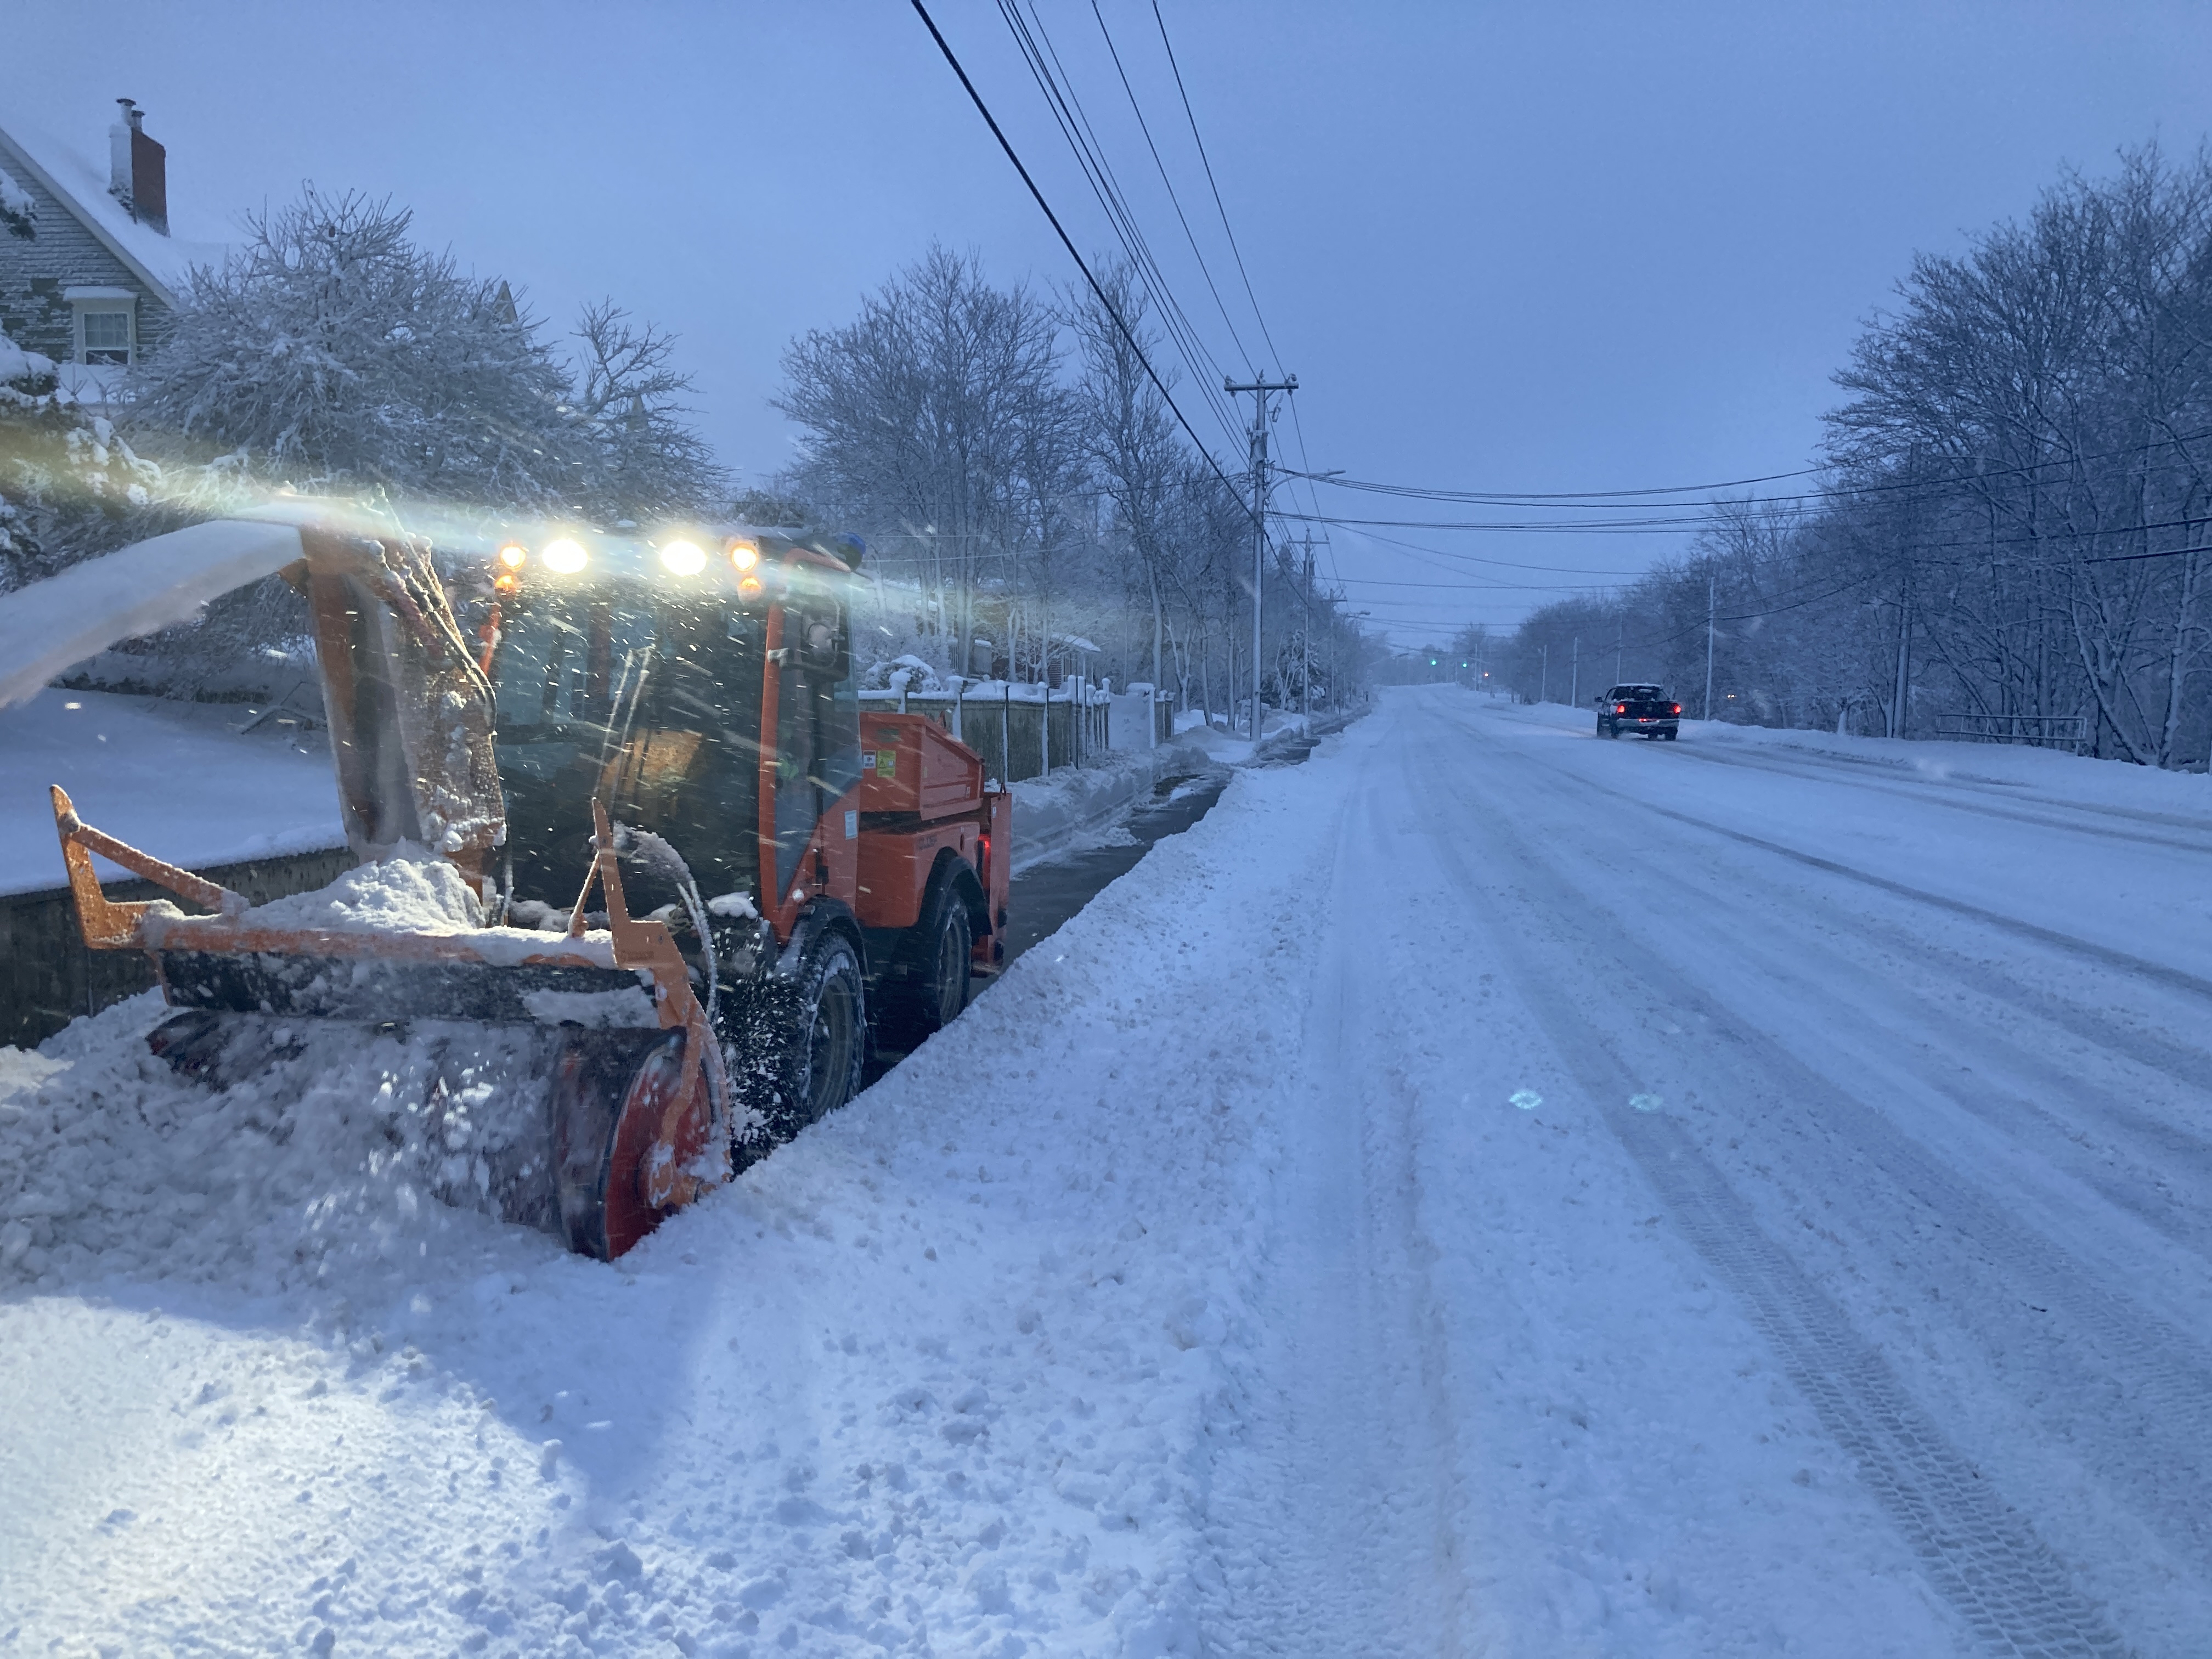 A sidewalk snow plow on the left of the image, and a snow covered road on the right.